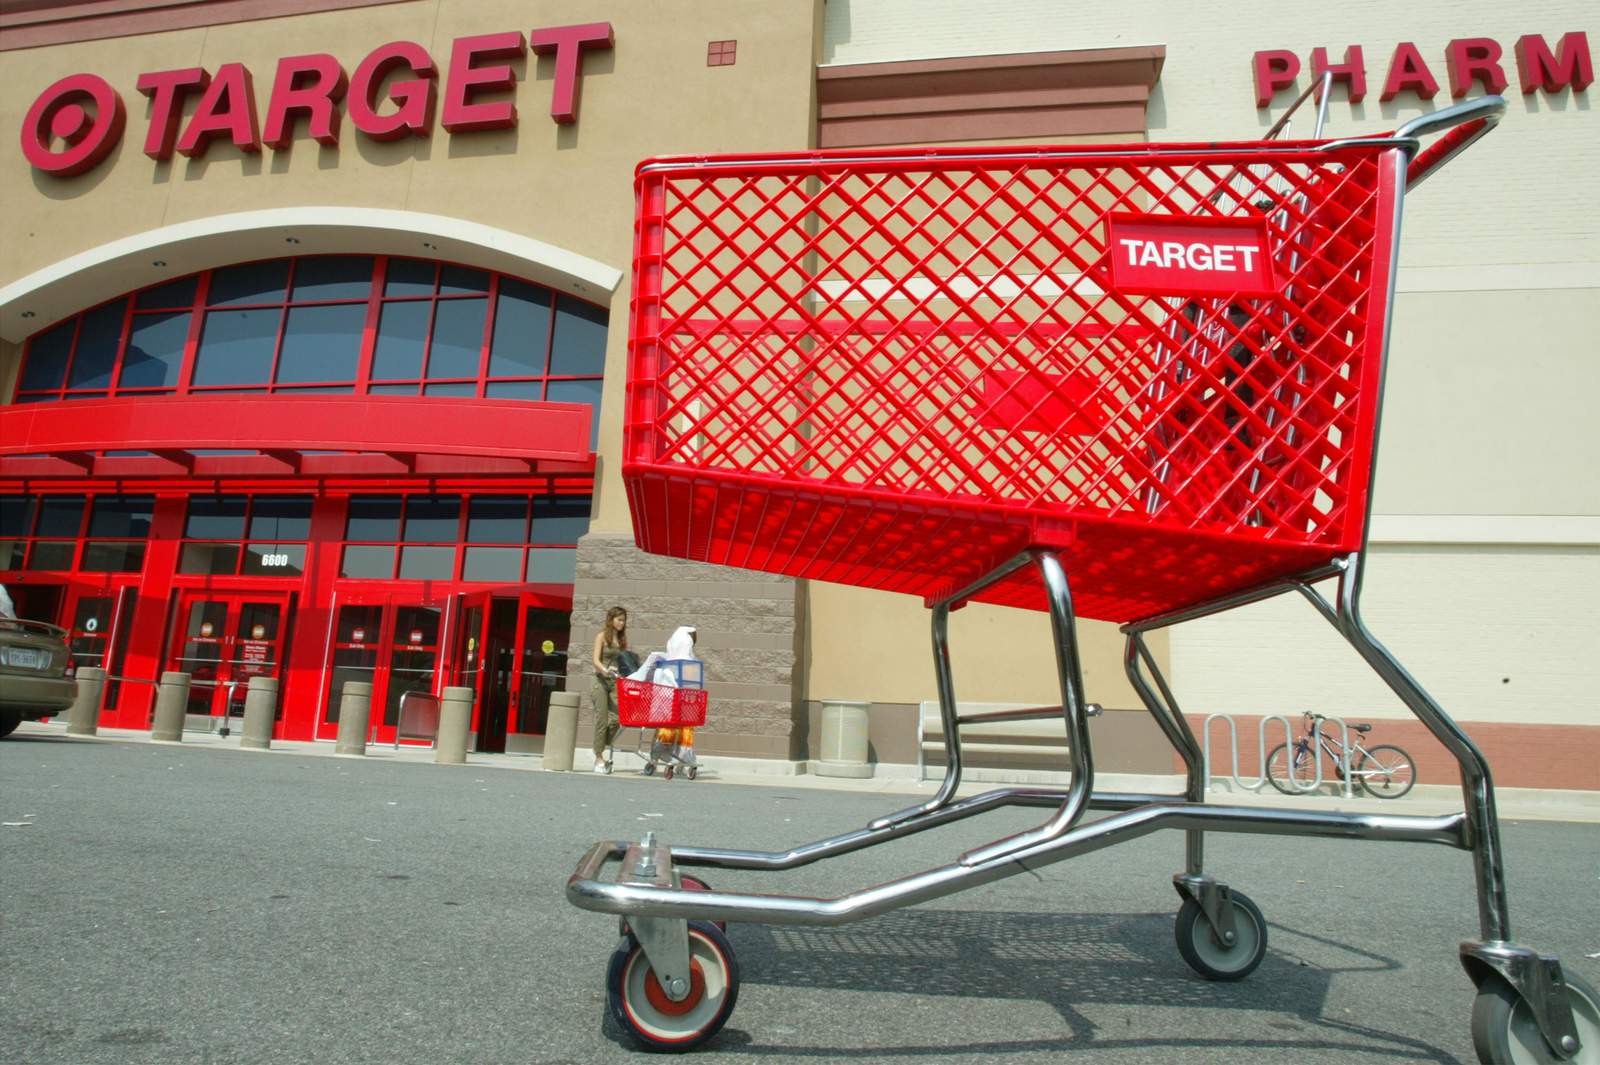 Its here: Targets car seat trade-in event is finally happening